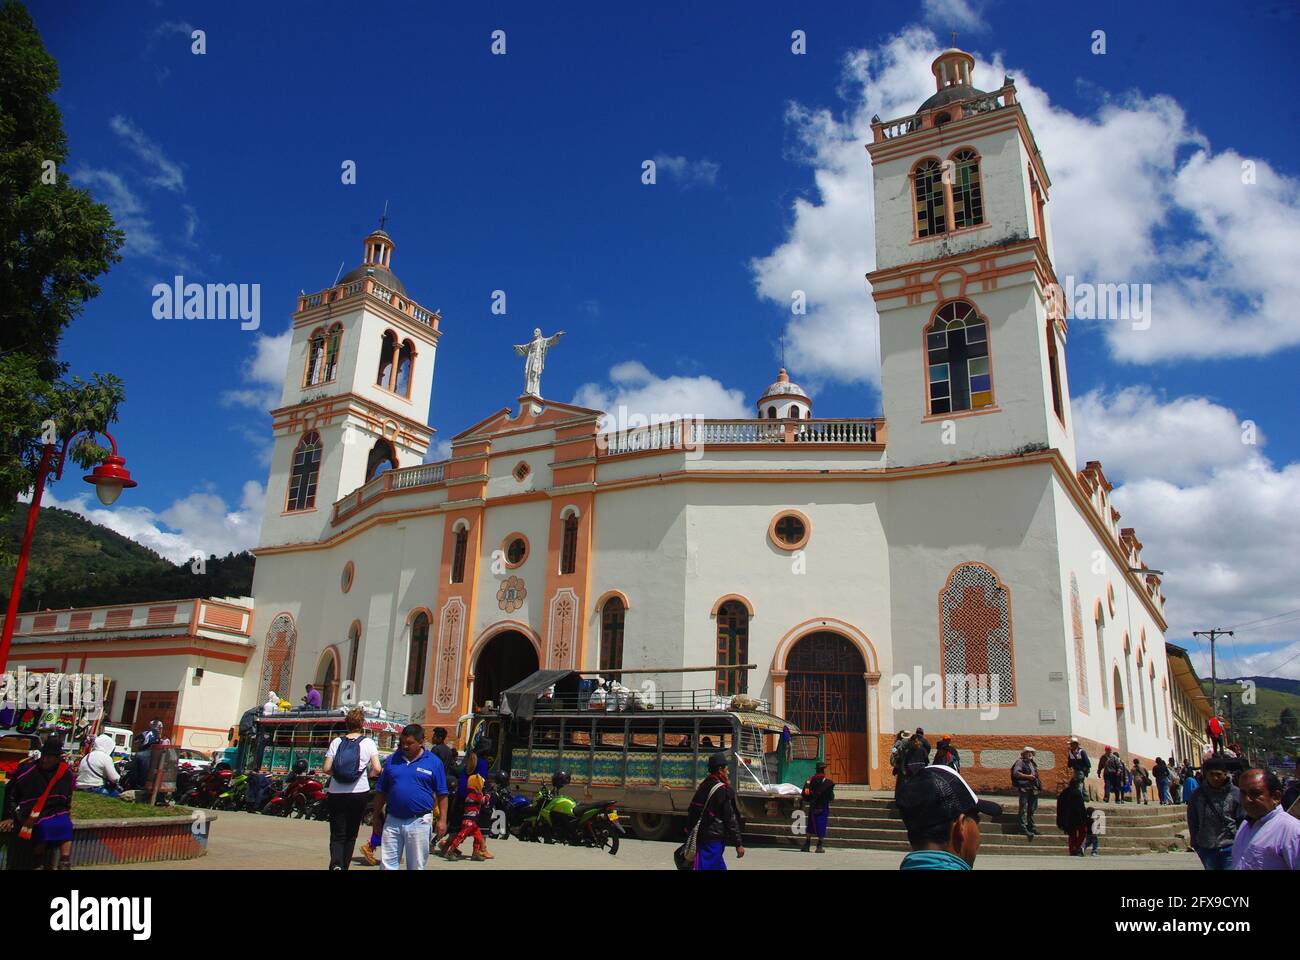 Villagers in traditional dress for market day in front of church in main square,Silvia, Colombia, South America Stock Photo